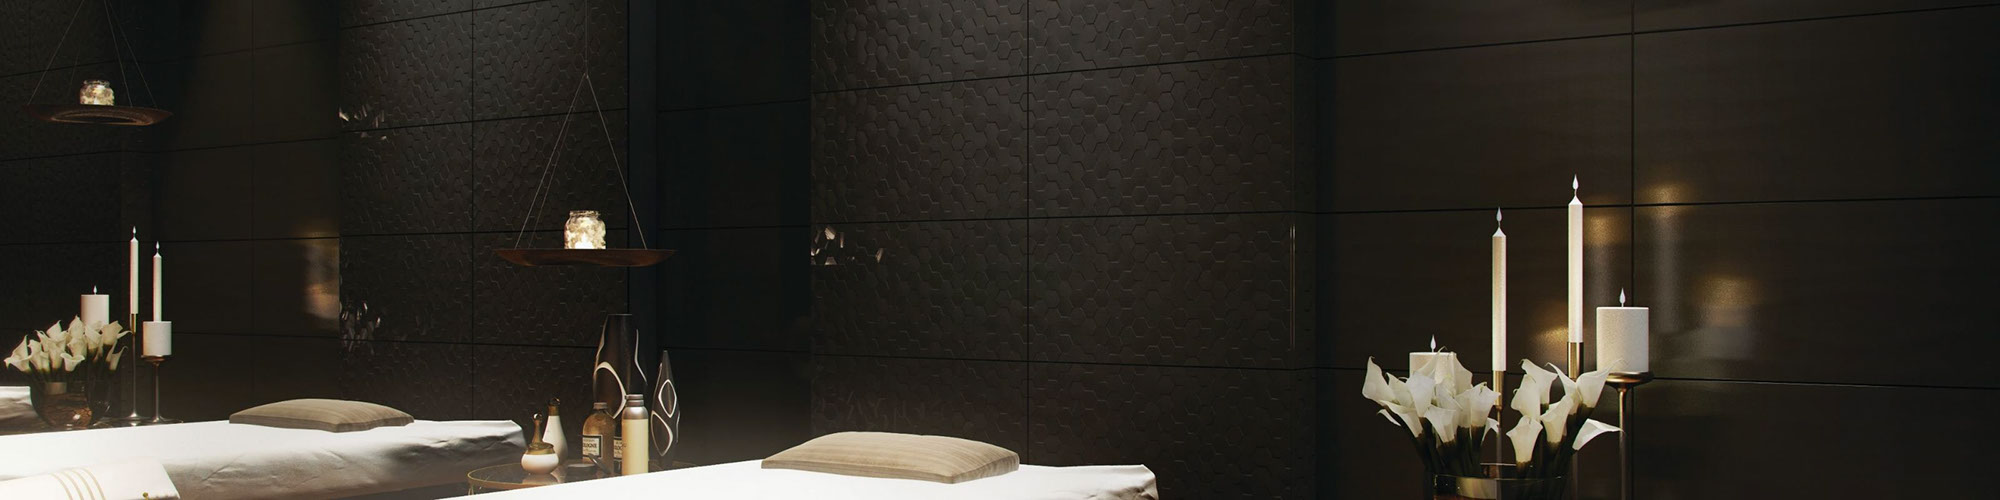 Spa massage room with black textured wall tile, massage table with blanket & pillow, floor tile that looks like wood planks, side tables with candles and flowers.